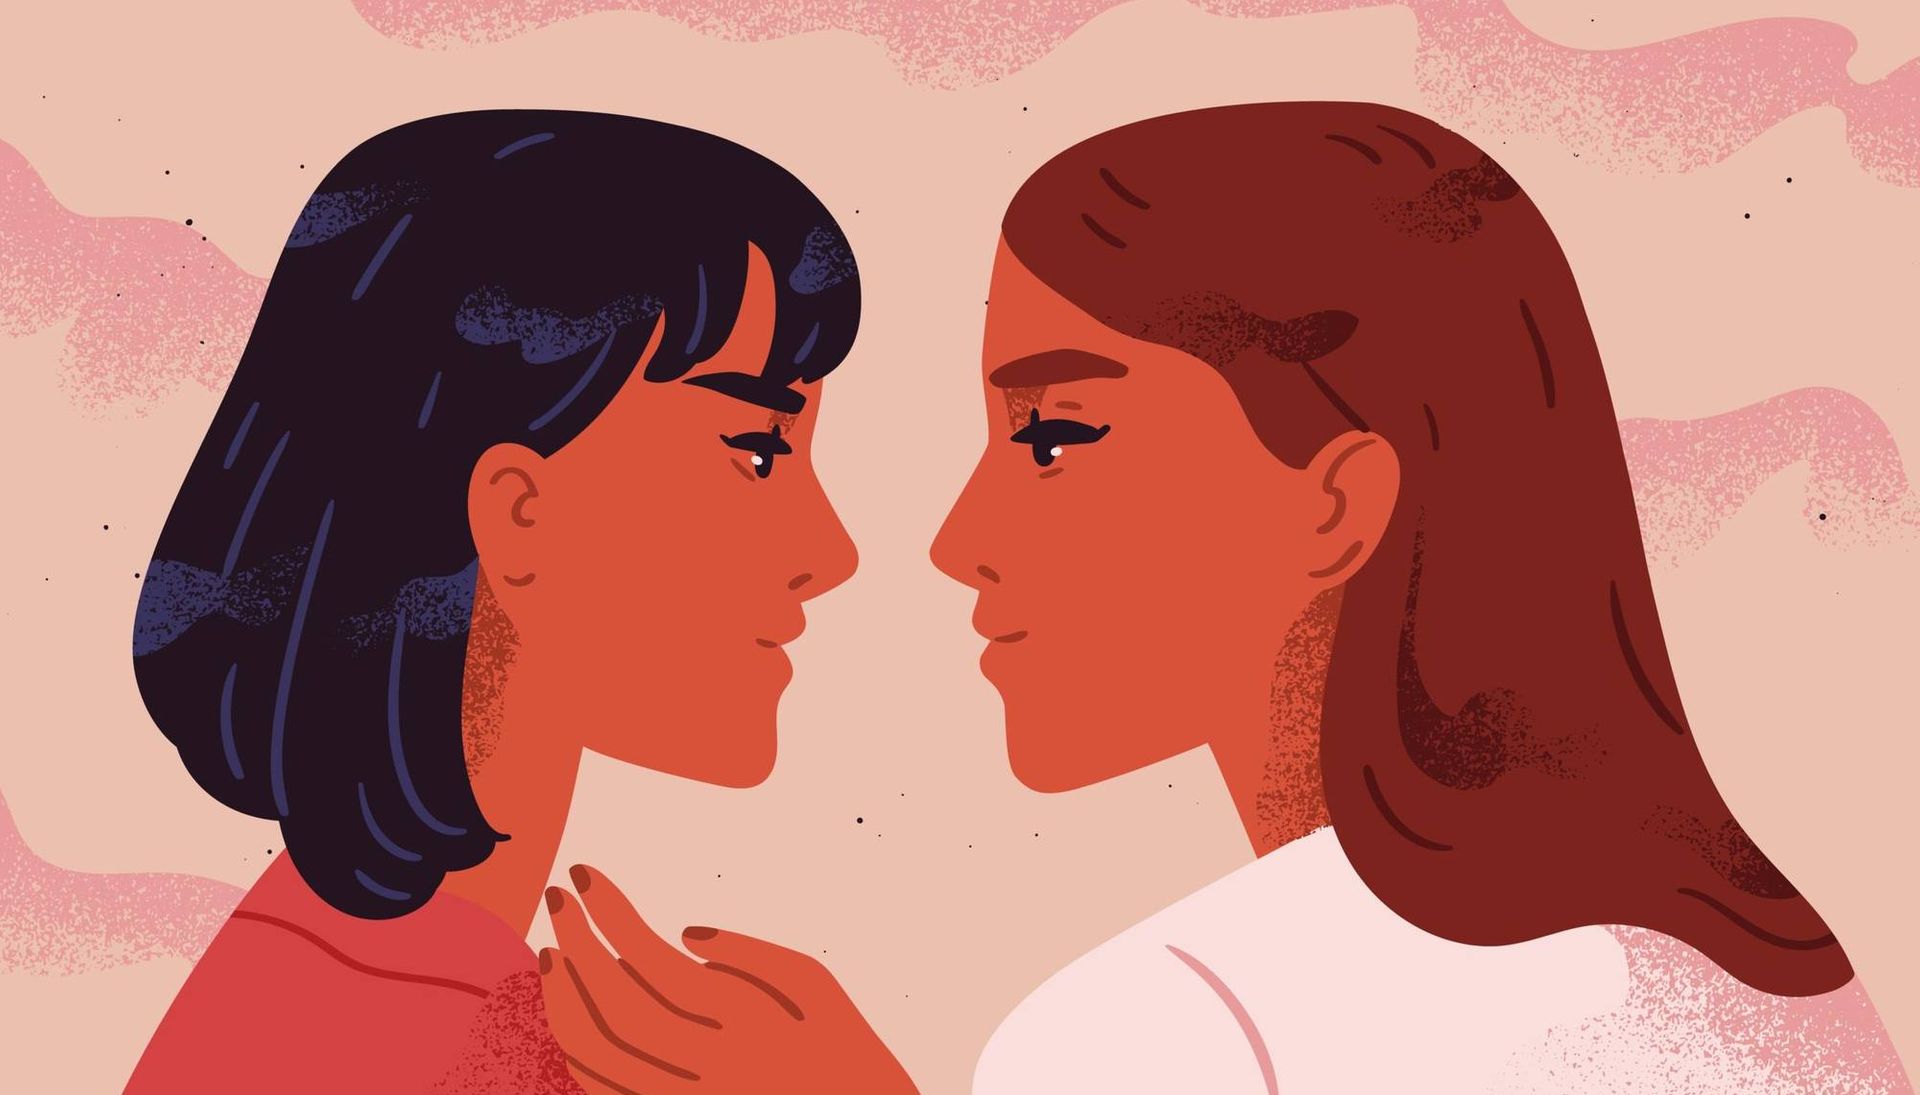 Illustration of two women in near close embrace, staring into each others eyes